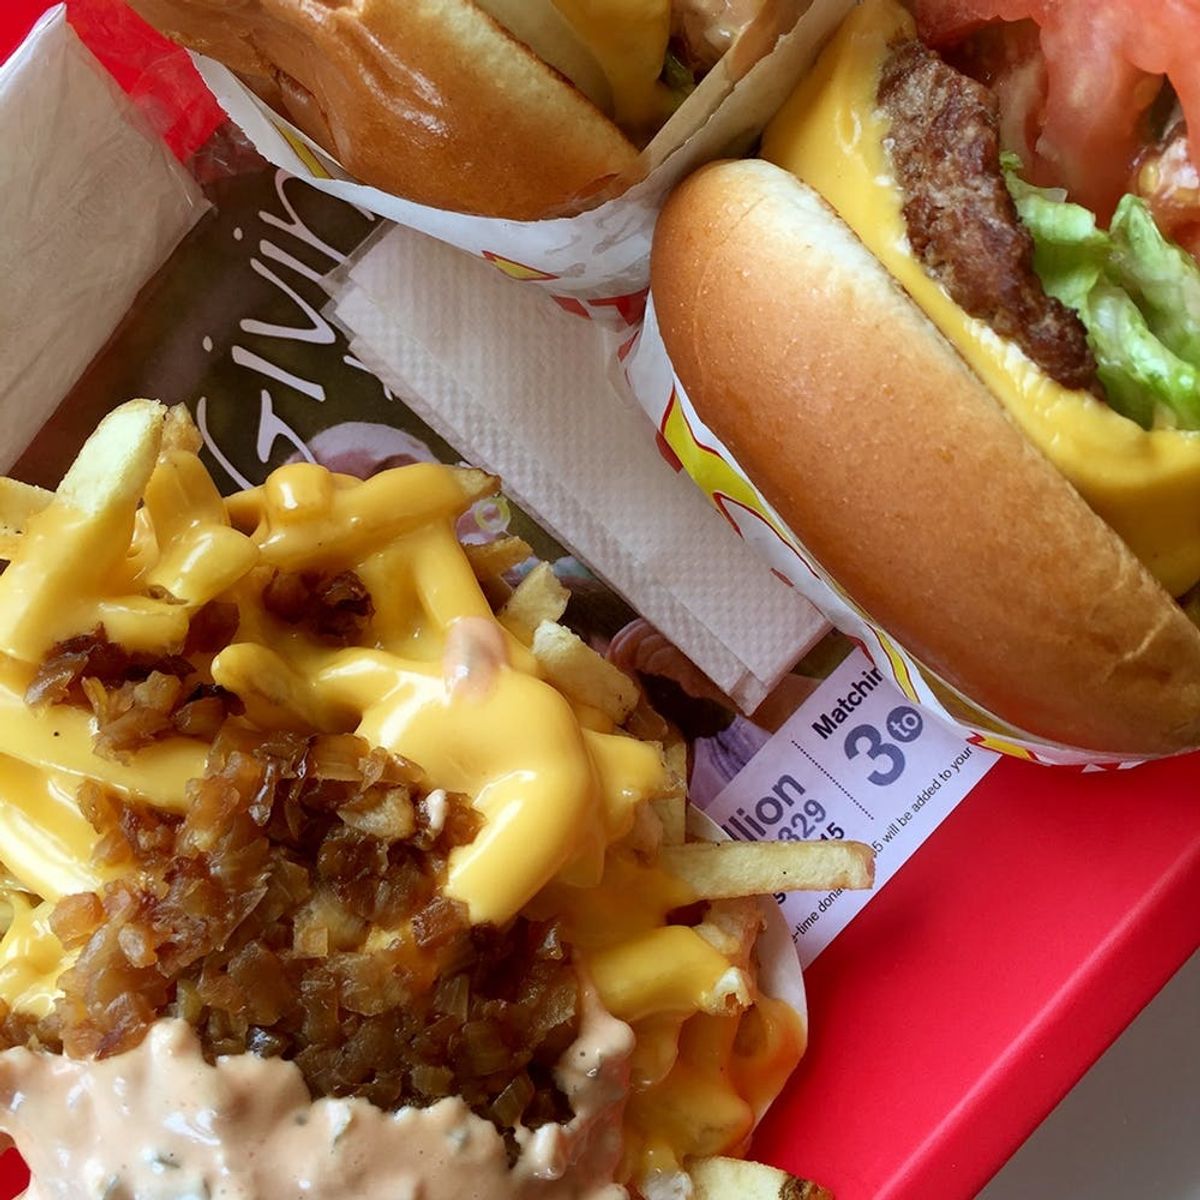 In-N-Out Animal Style is mustard grilled and features extra spread (AKA Thousand Island special sauce), pickles, and grilled, caramelized onions.